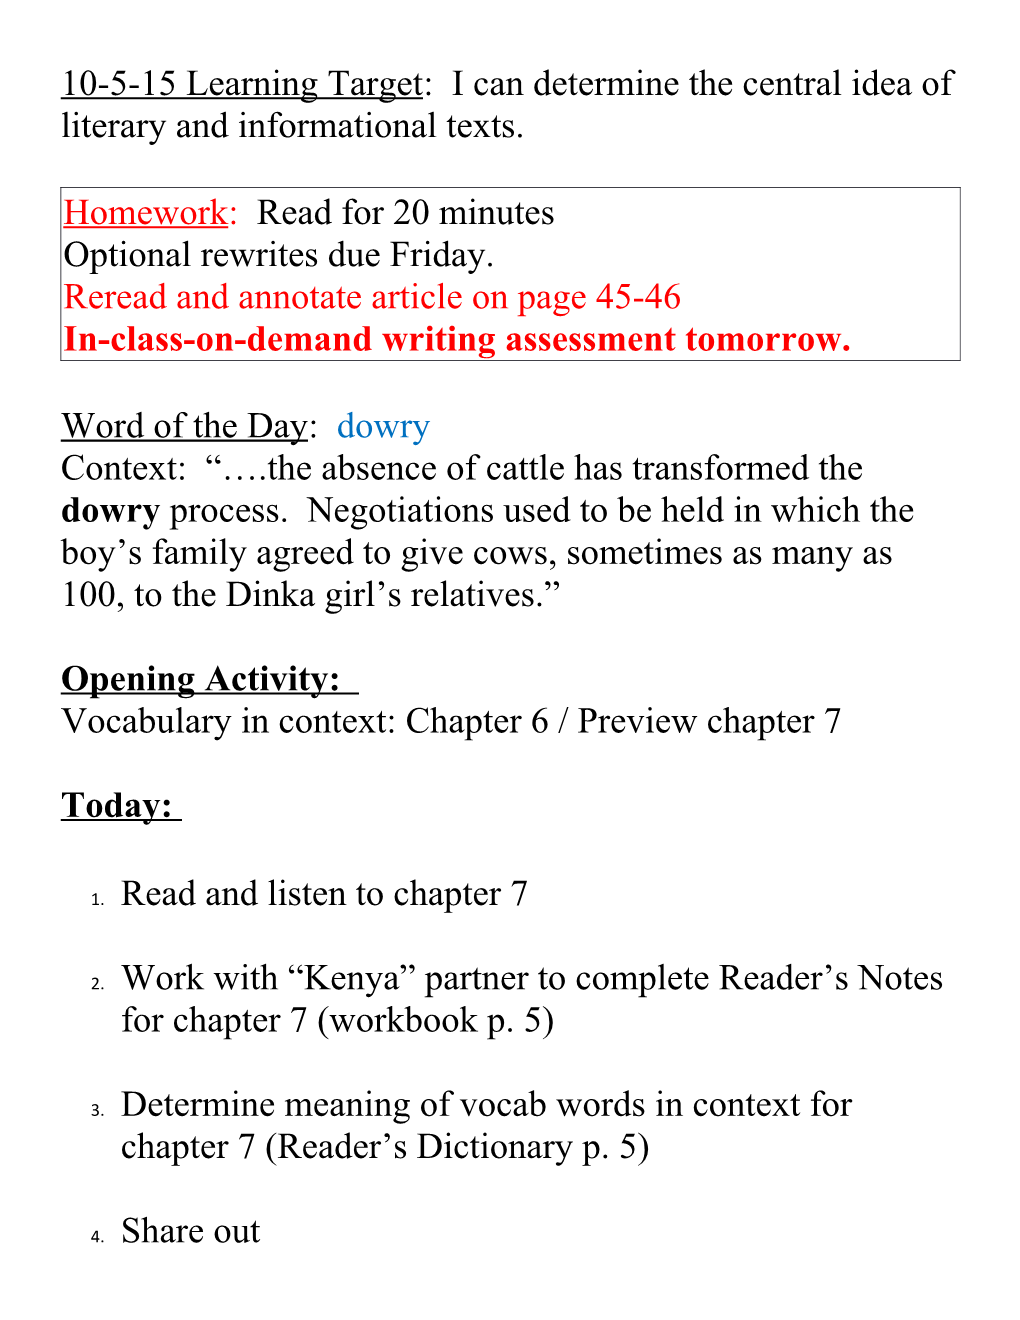 10-5-15 Learning Target: I Can Determine the Central Idea of Literary and Informational Texts